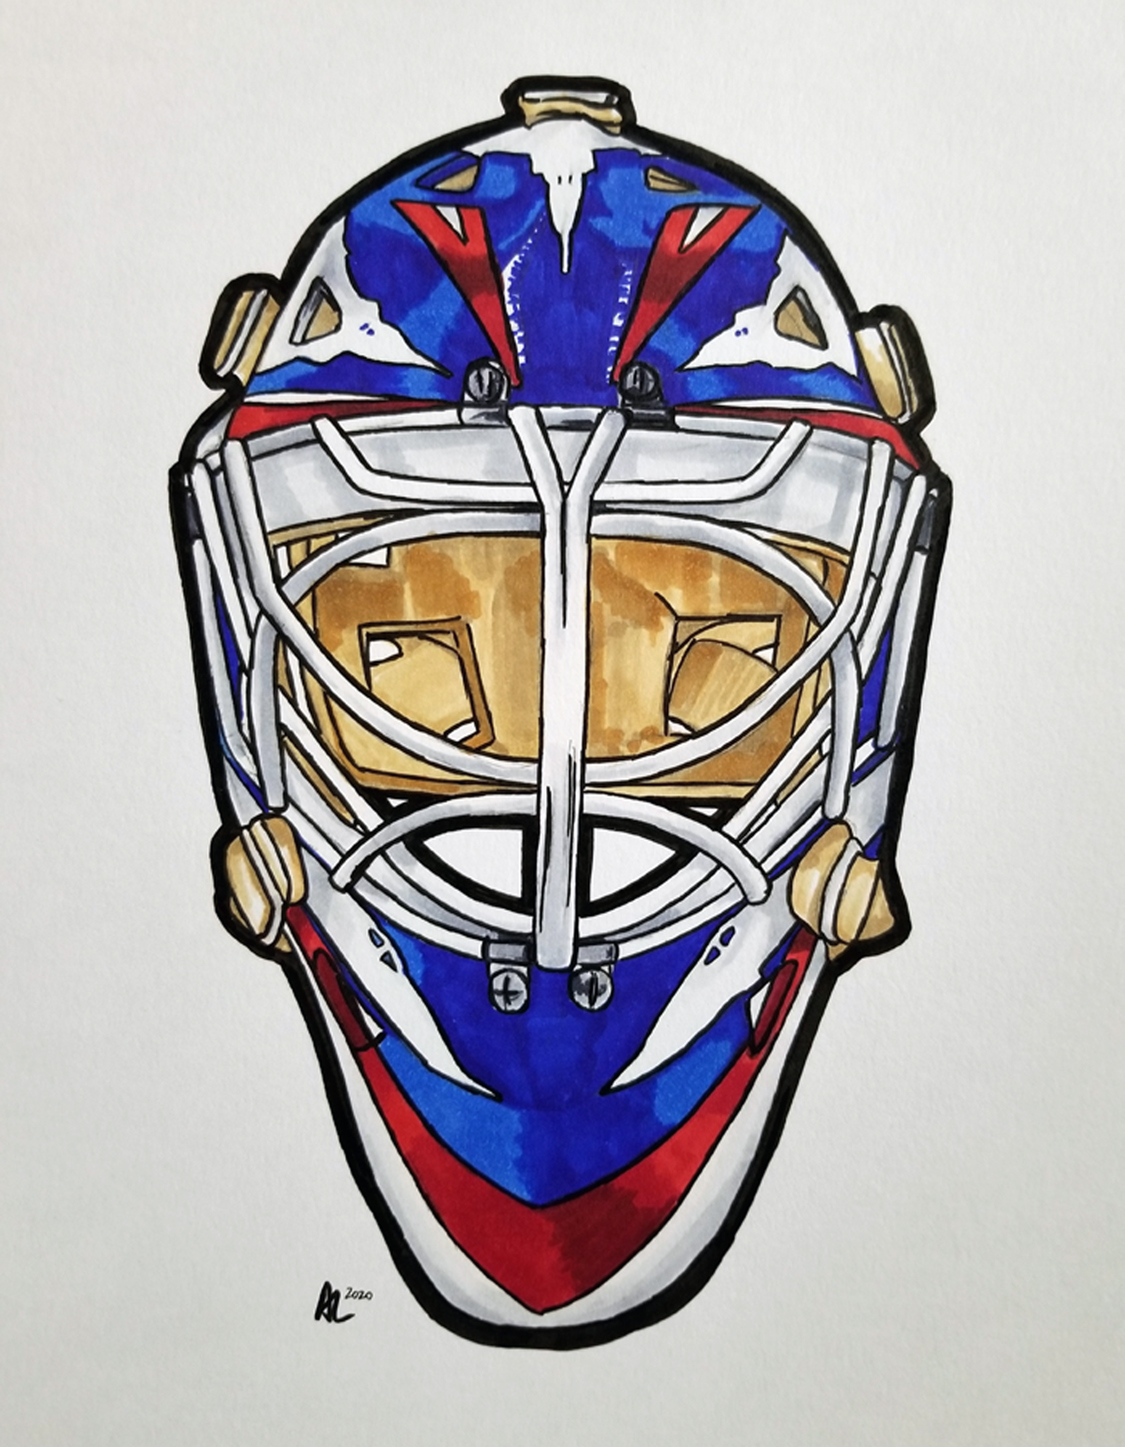 Pen and ink drawing of a goalie mask with cage and blue, red, and white airplane design.